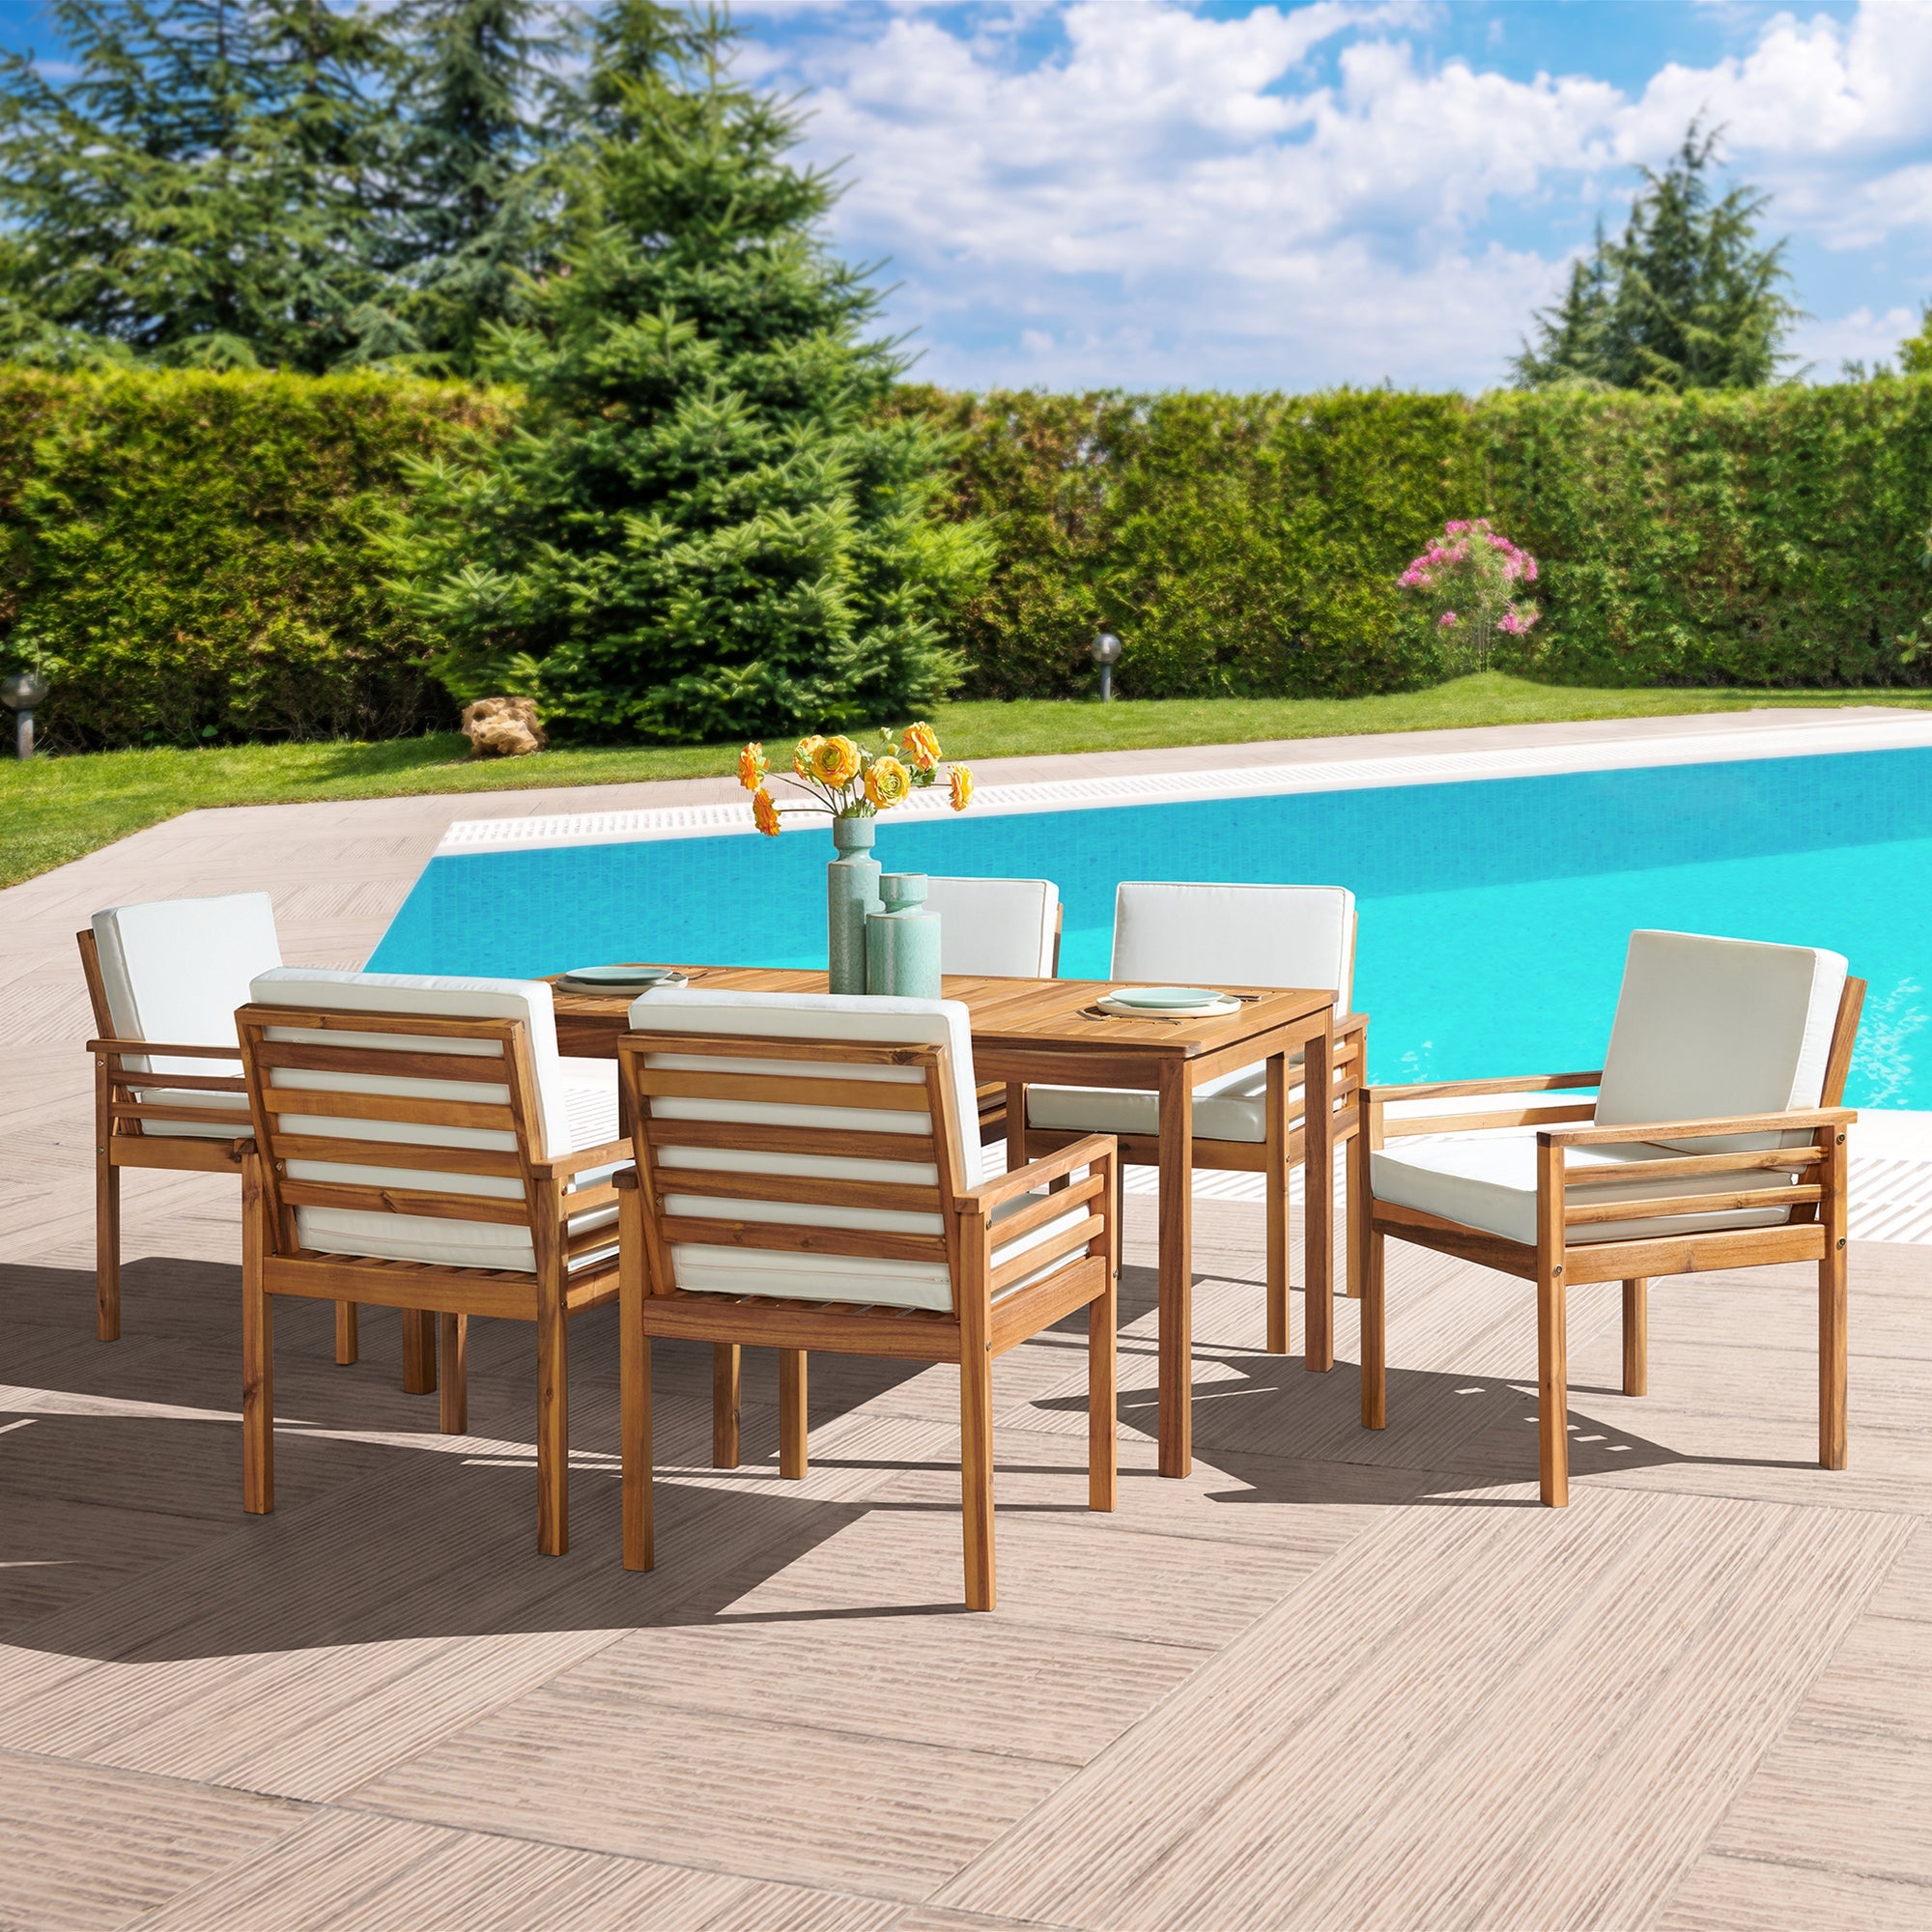 Cream-Fabric-FCR-Okemo-Acacia-Wood-Outdoor-7-piece-Outdoor-Dining-Set-with-Table-and-6-Dining-Chairs-with-Cushions-Outdoor-Dining